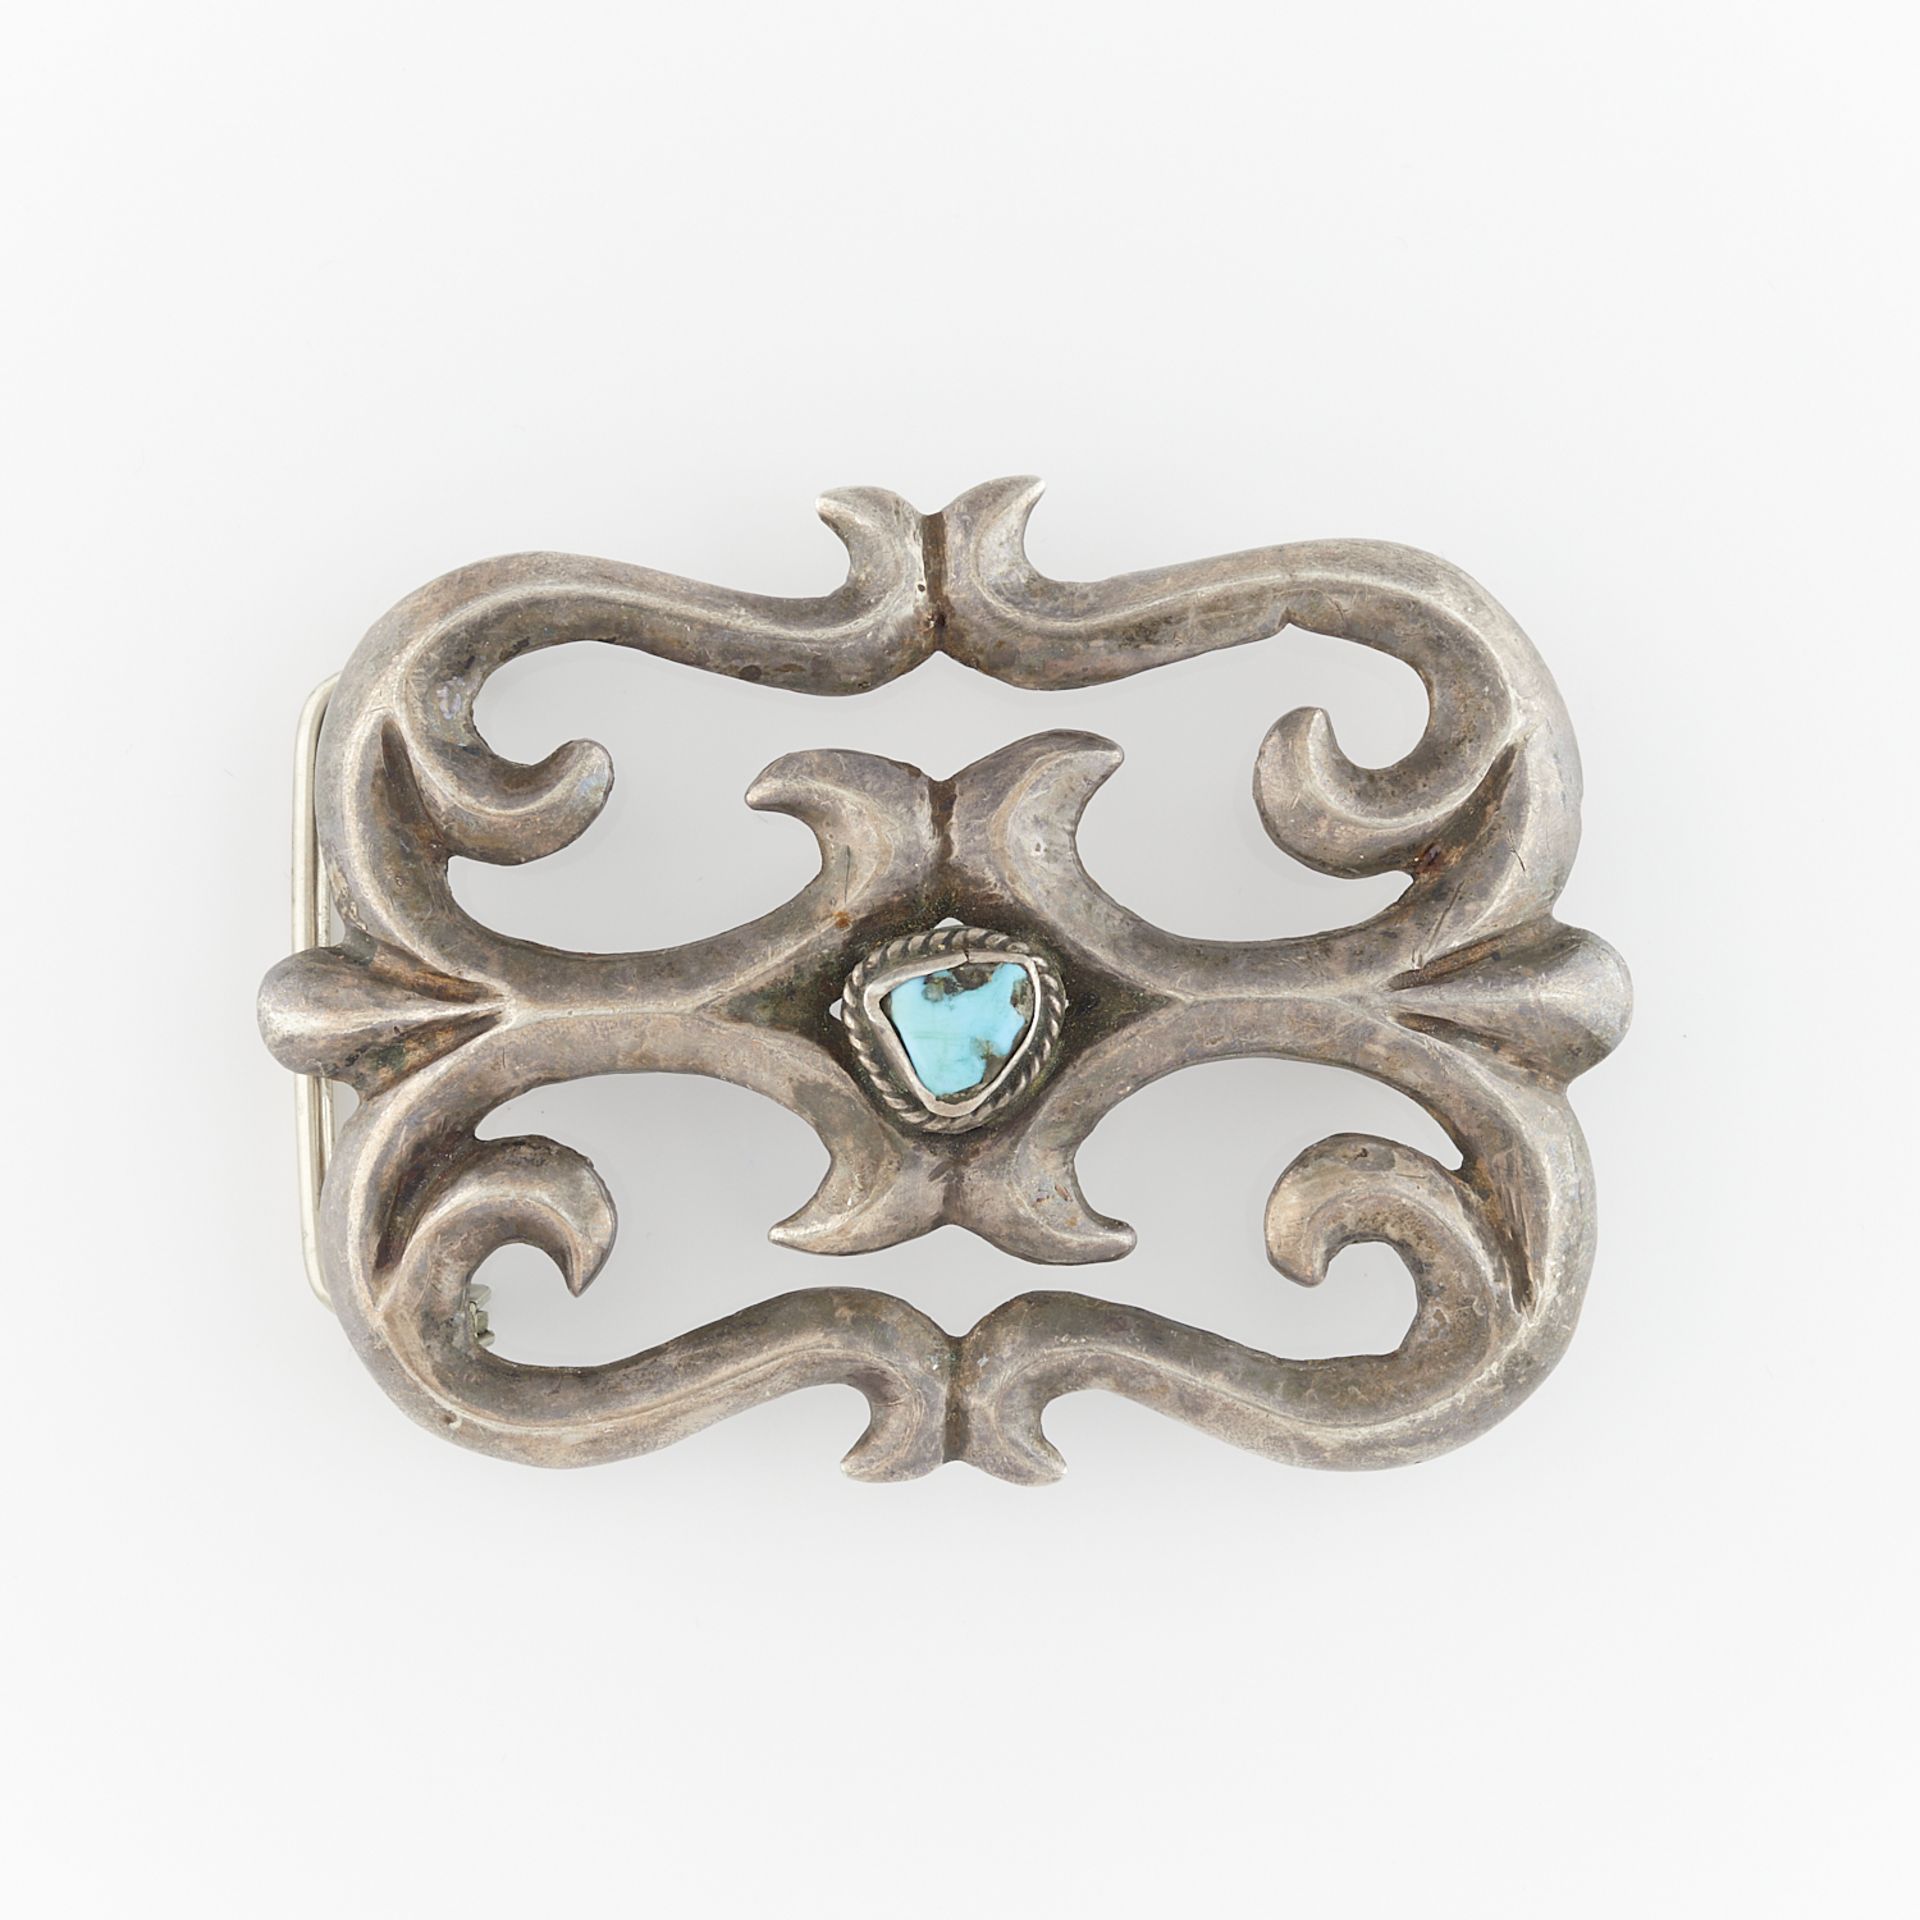 Sandcast Buckle with Turquoise - Image 2 of 5